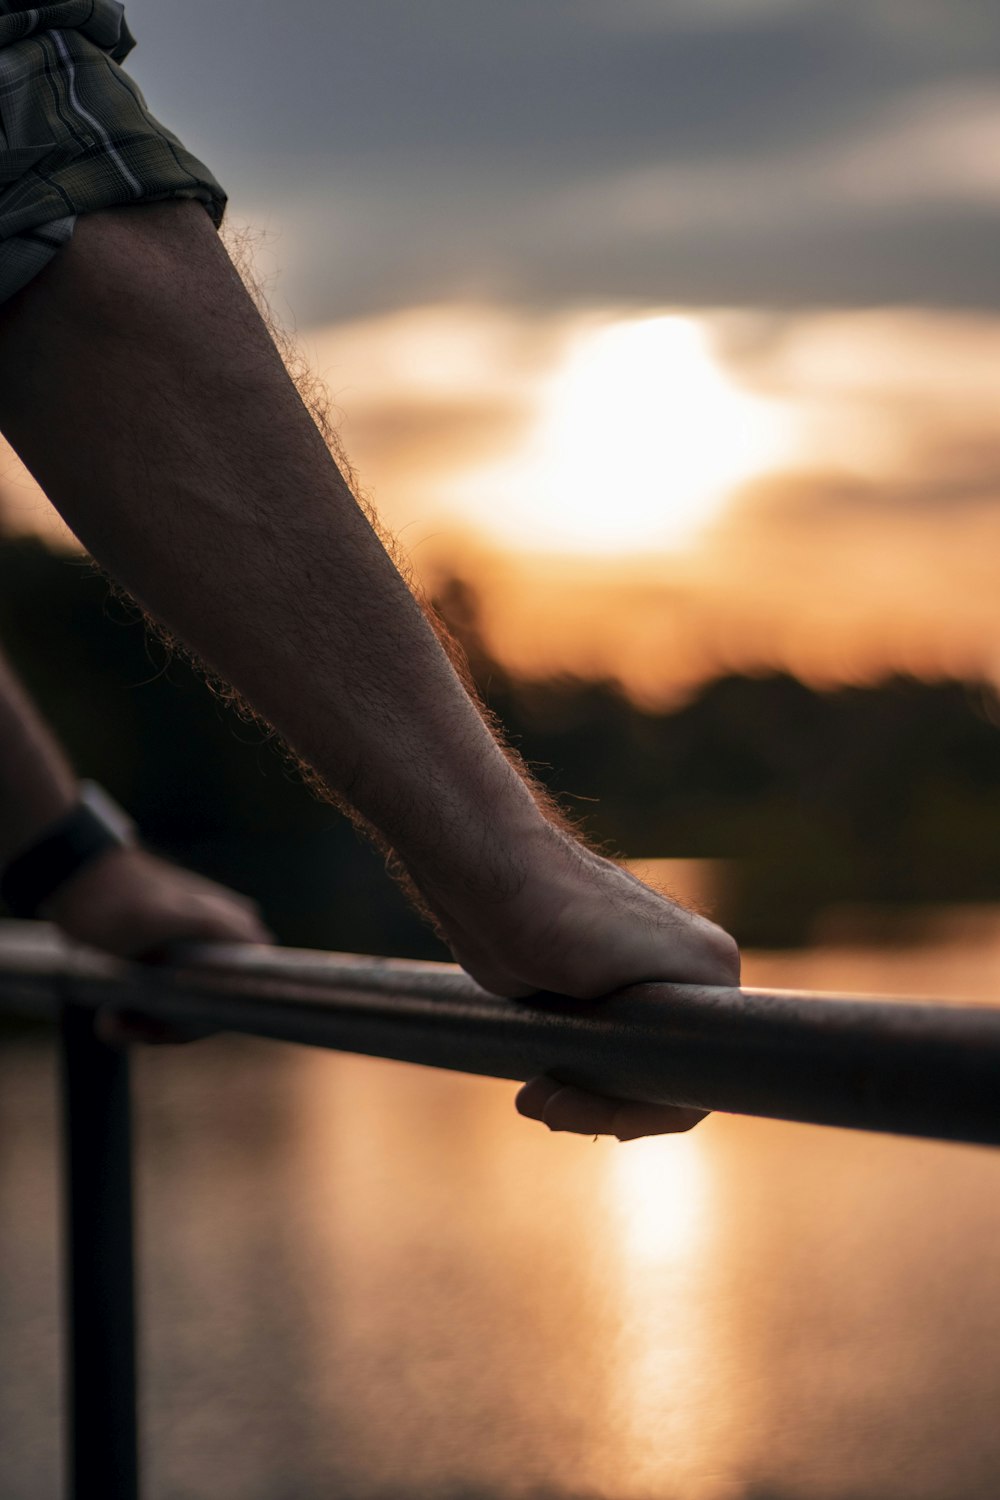 a person standing on a railing with the sun setting in the background